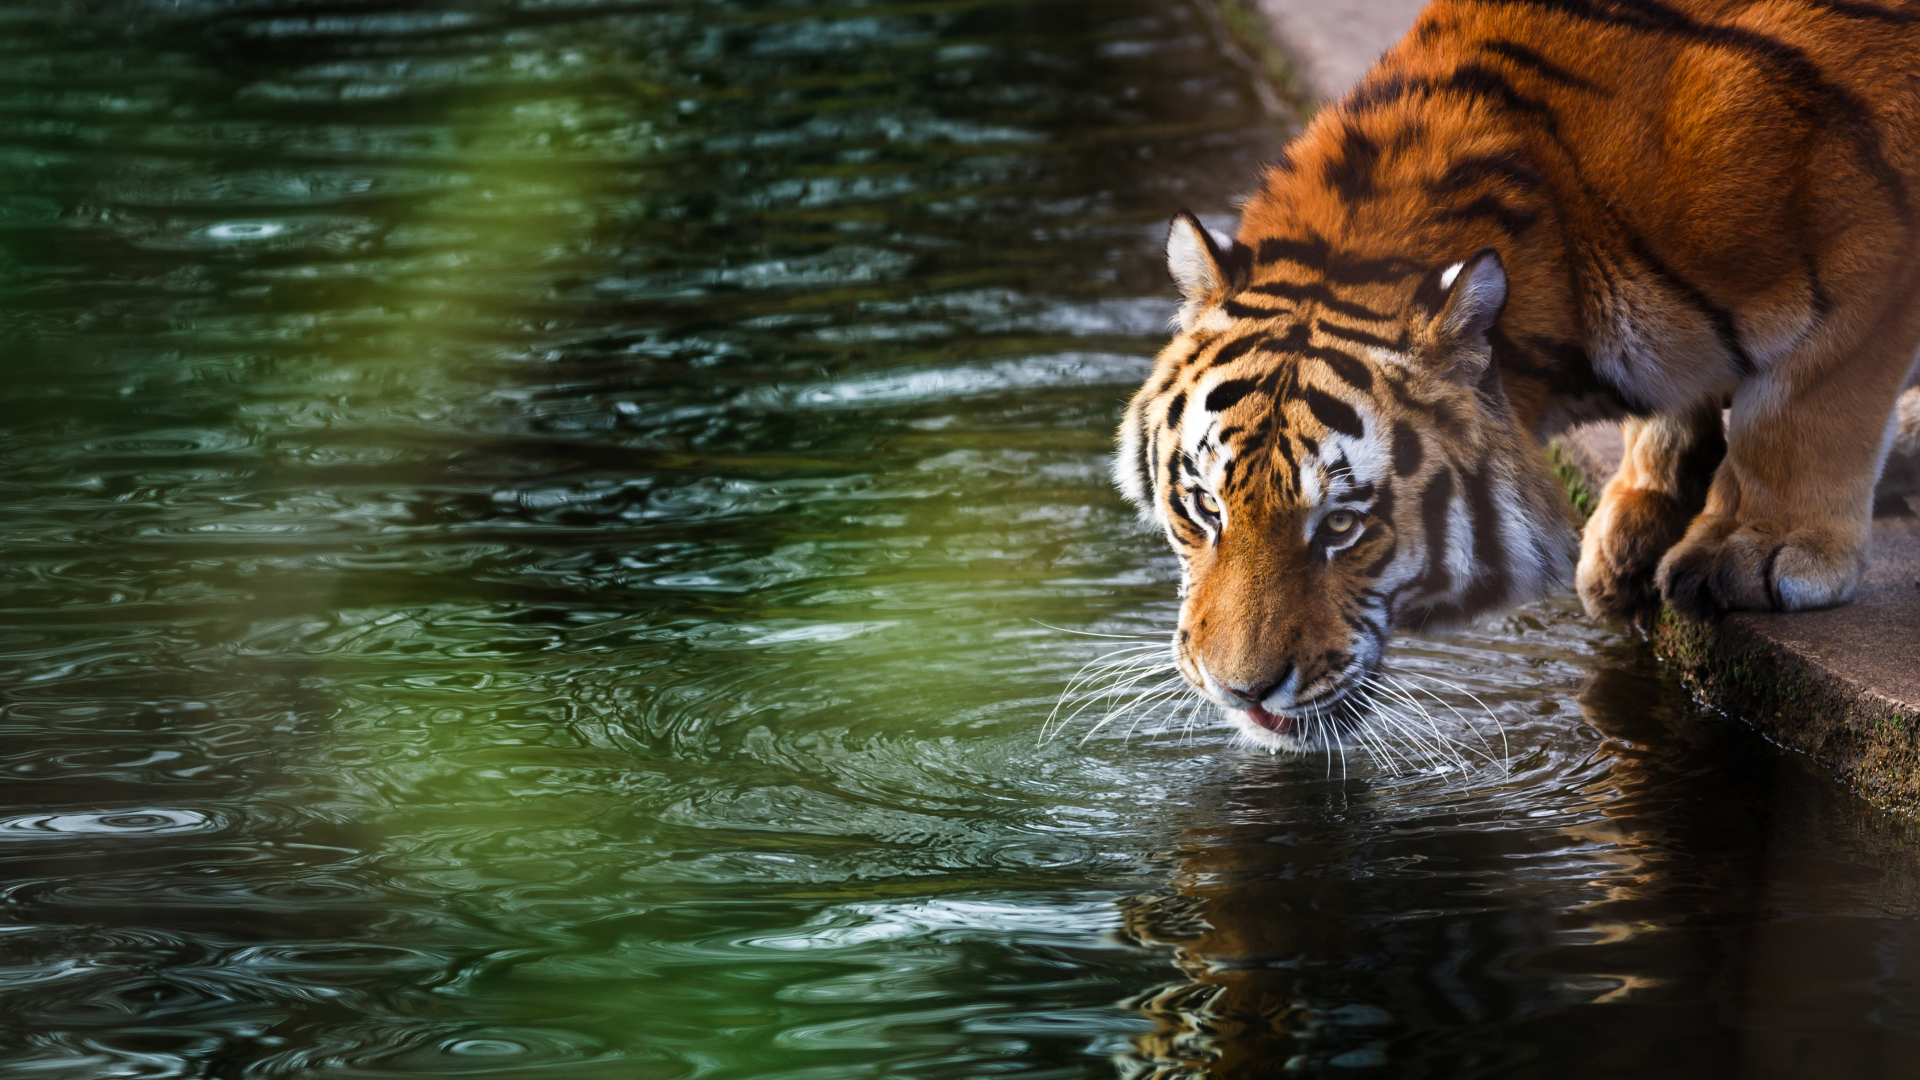 Download 1920x1080 Wallpaper Tiger Drinking Water, Full Hd, Hdtv, Fhd, 1080p,  1920x1080 Hd Image, Background, 3938